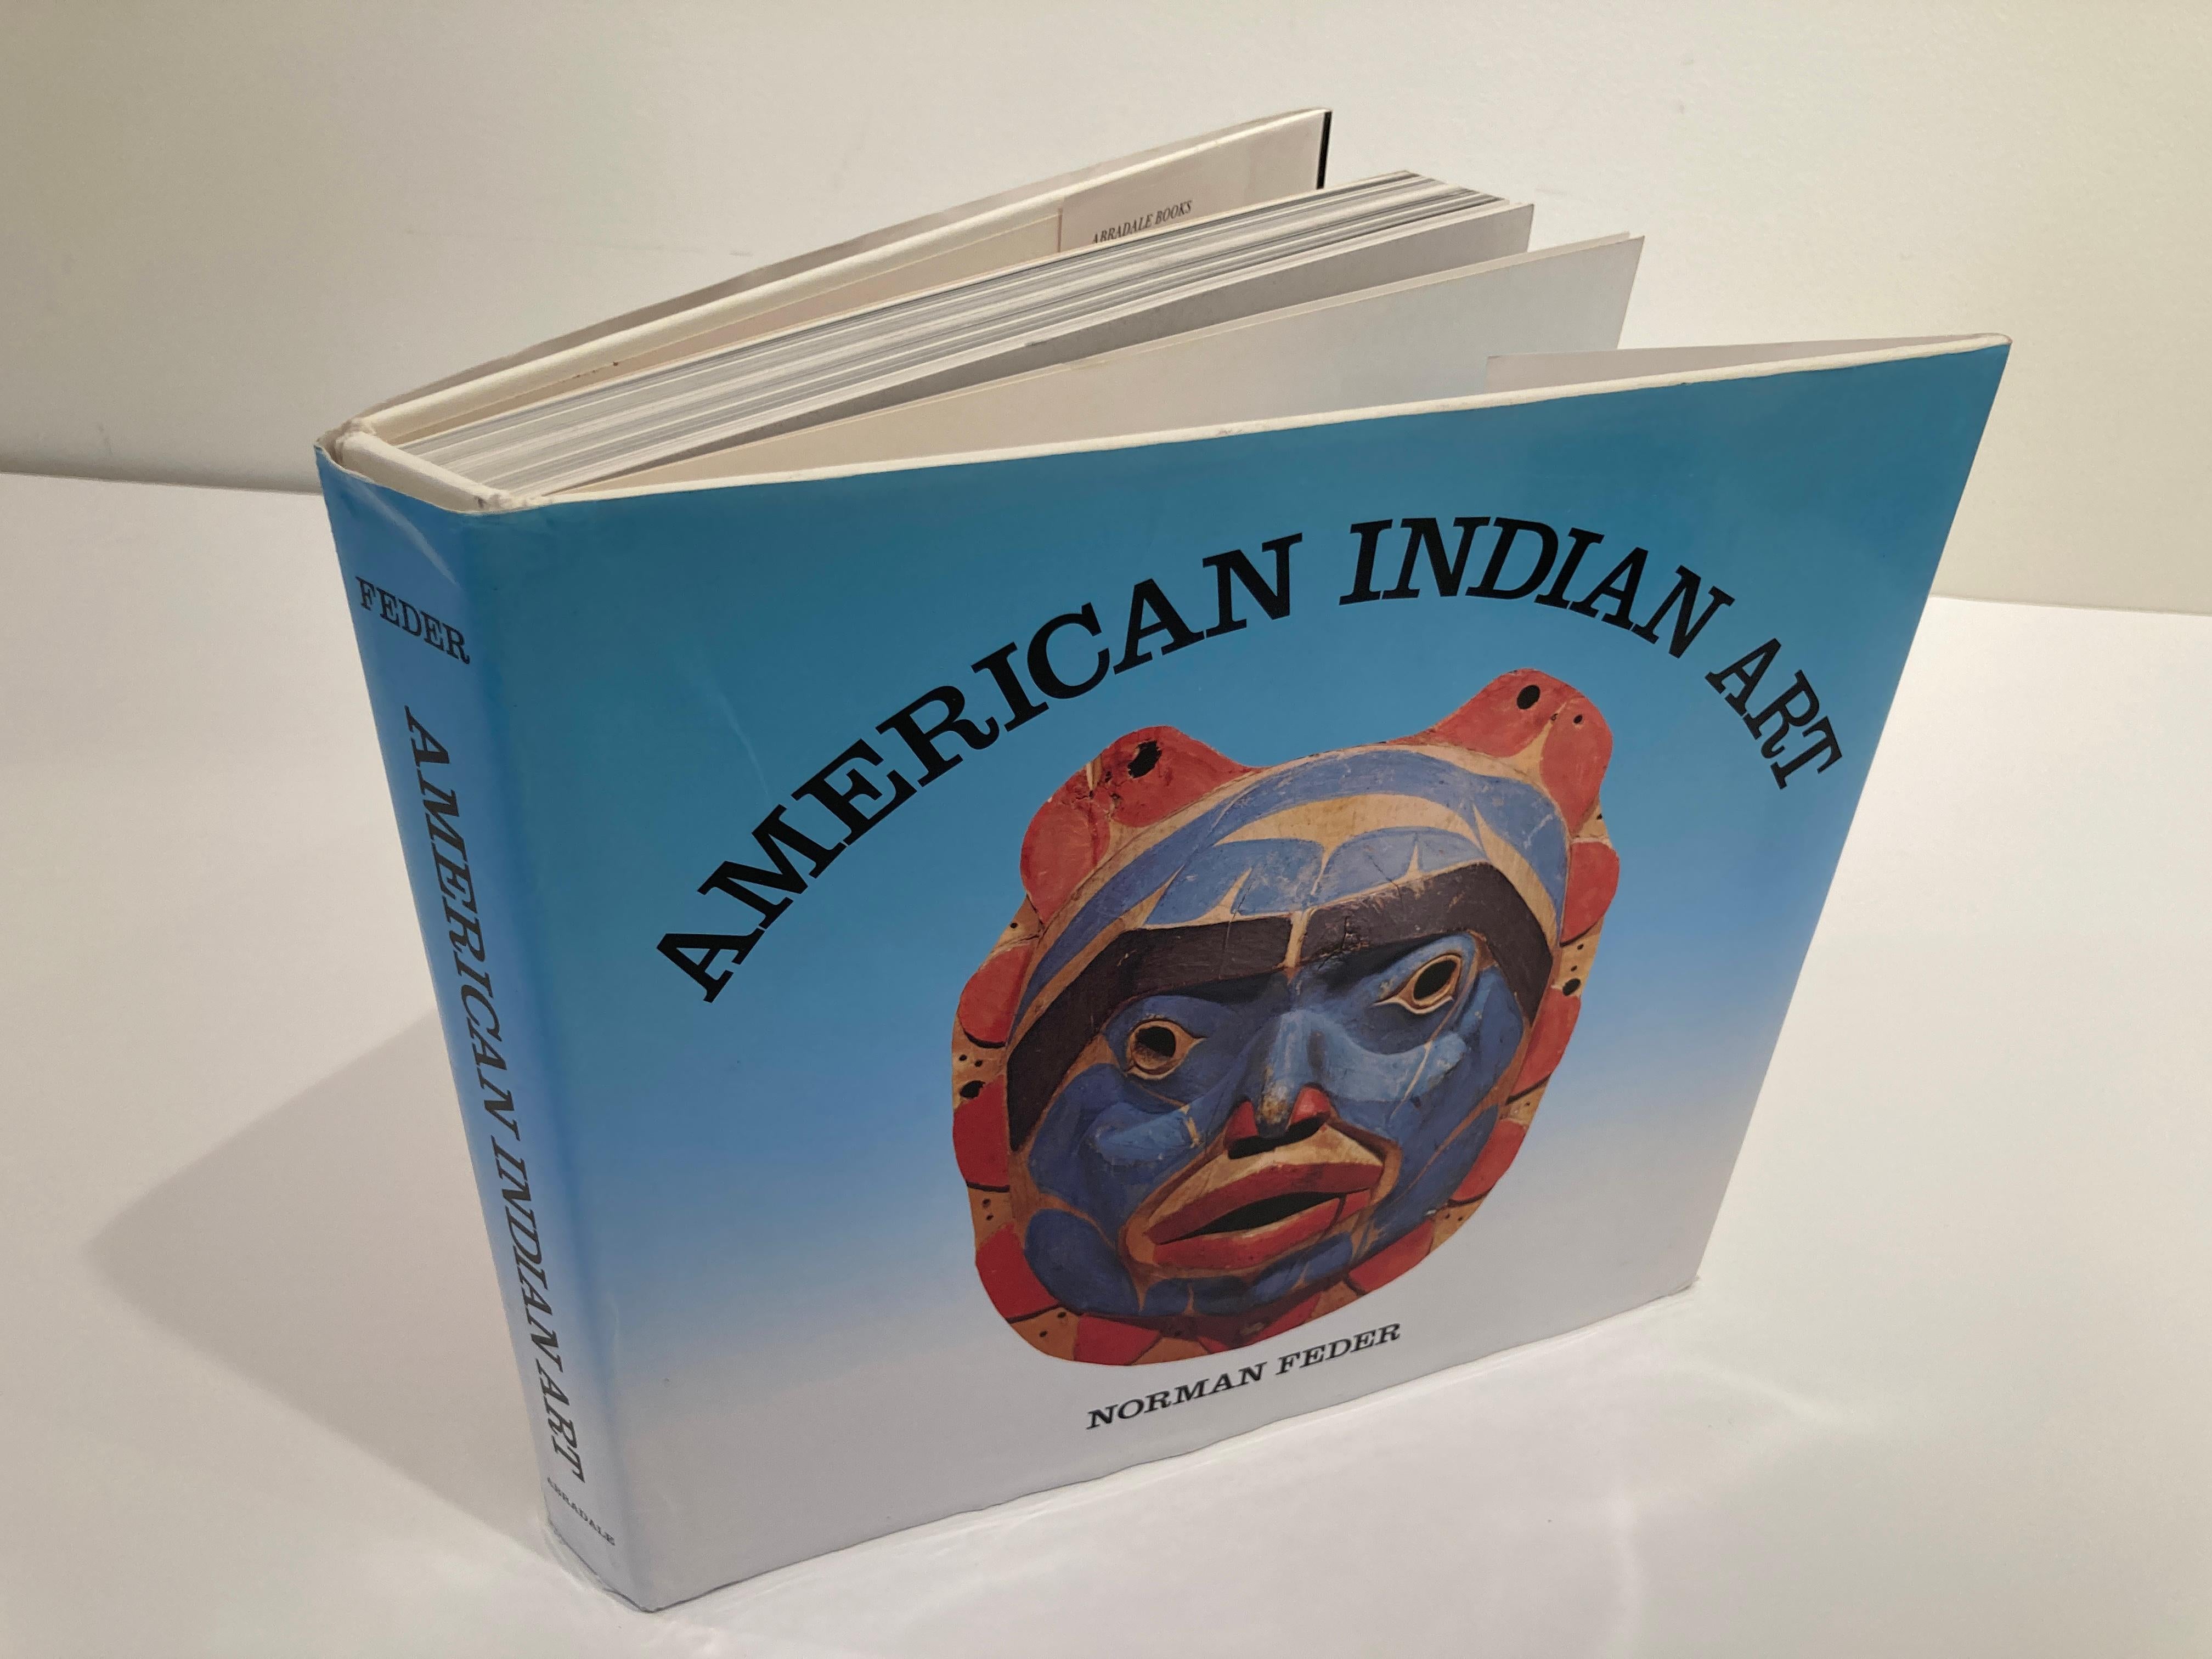 American Indian Art by Norman Feder Hardcover Book 1